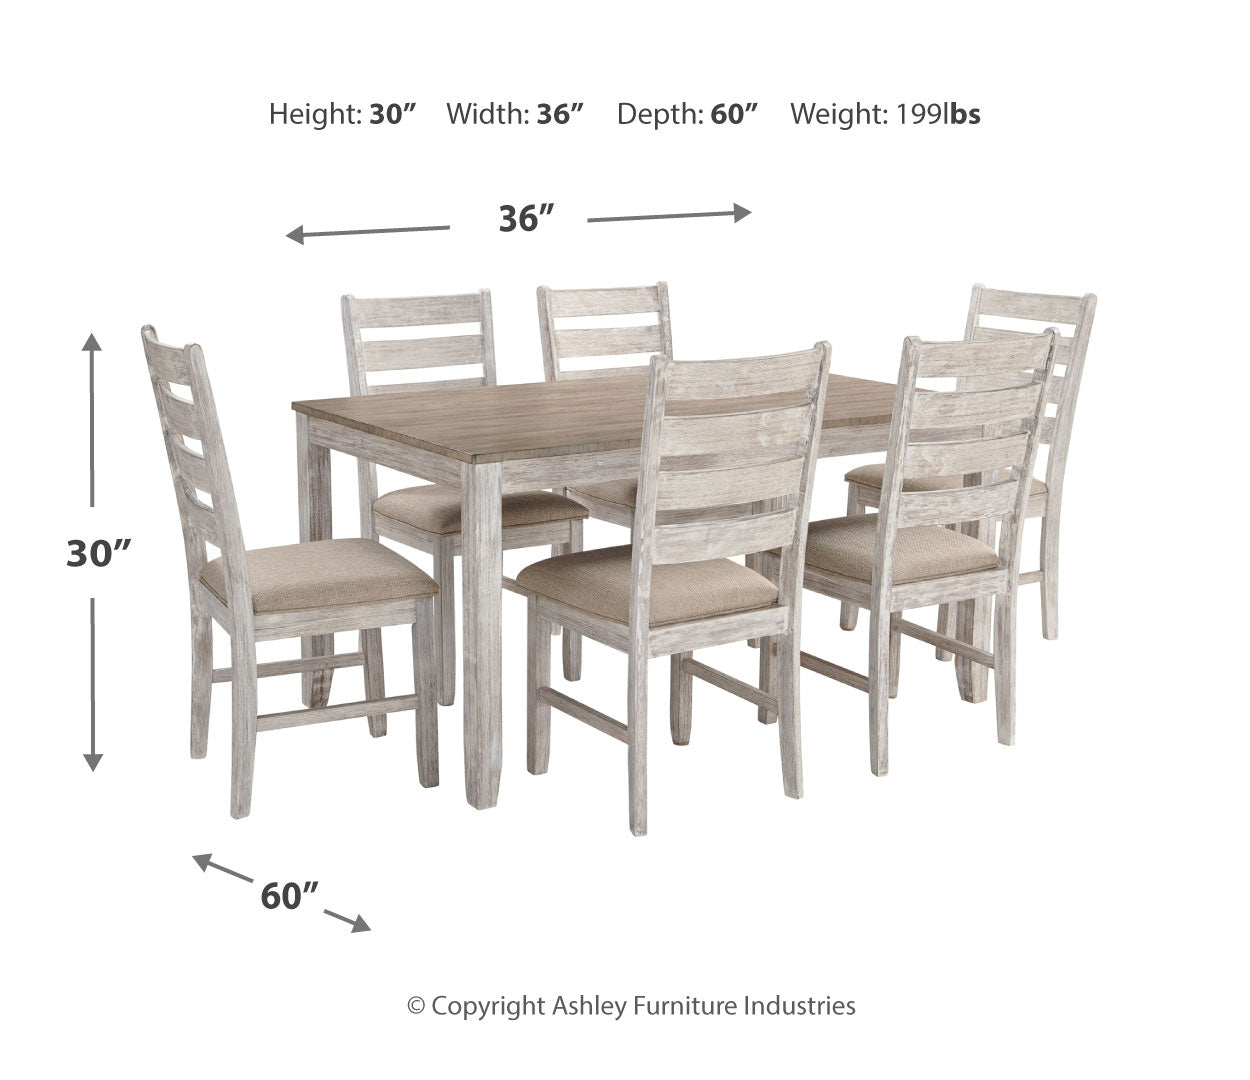 Skempton Dining Table and Chairs (Set of 7)